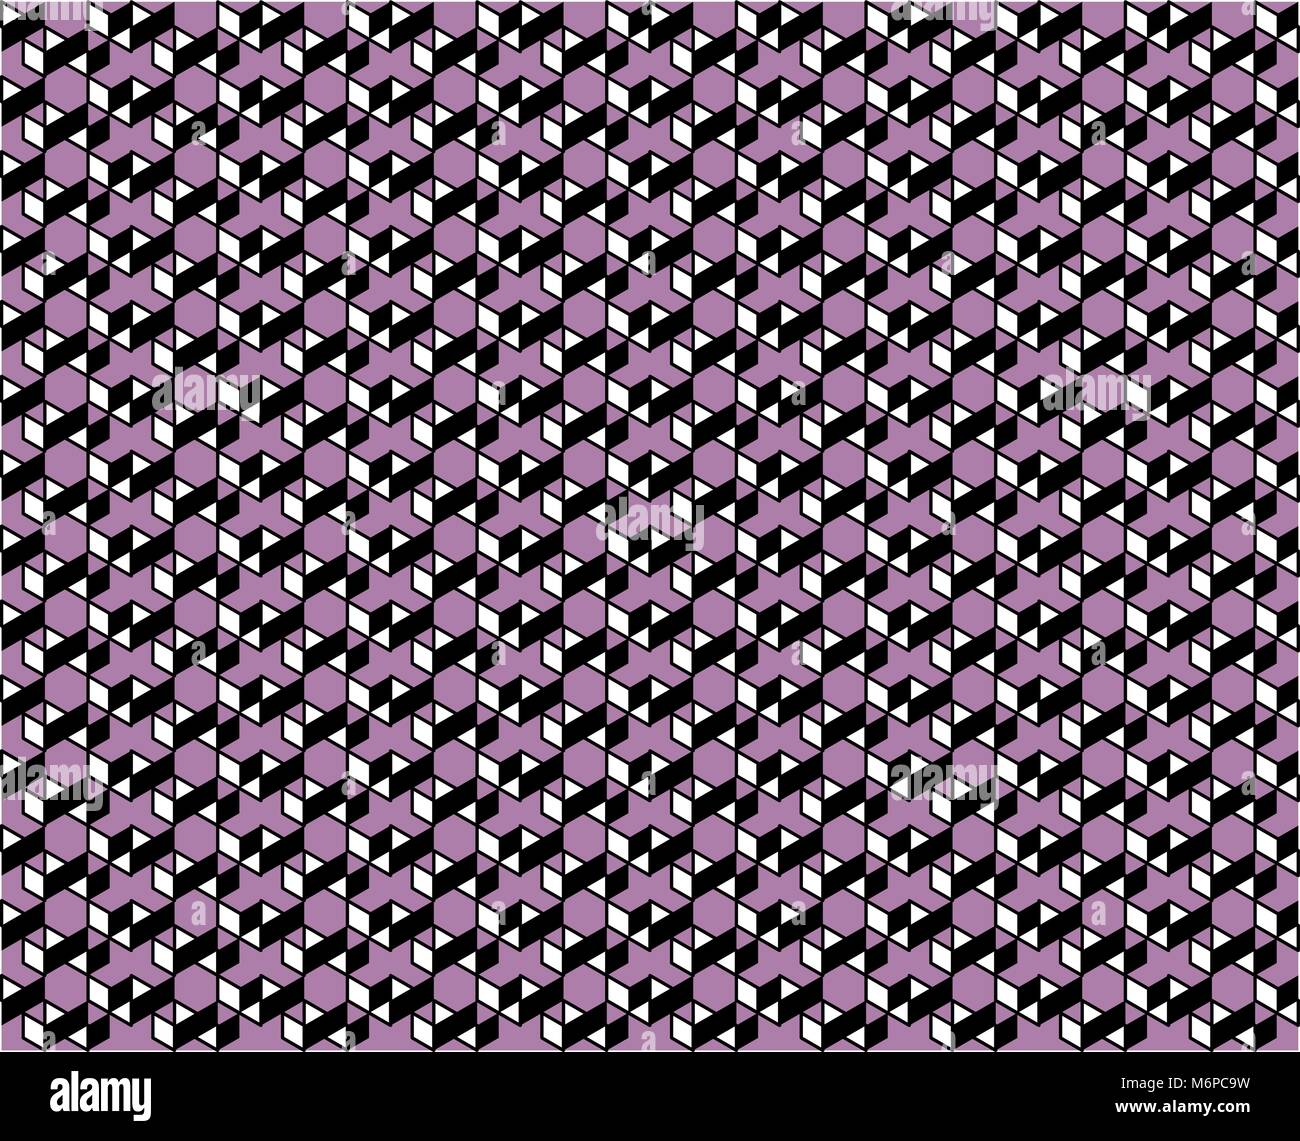 Abstract geometric pattern of purple, black, and white colors - Vector illustration. Stock Vector